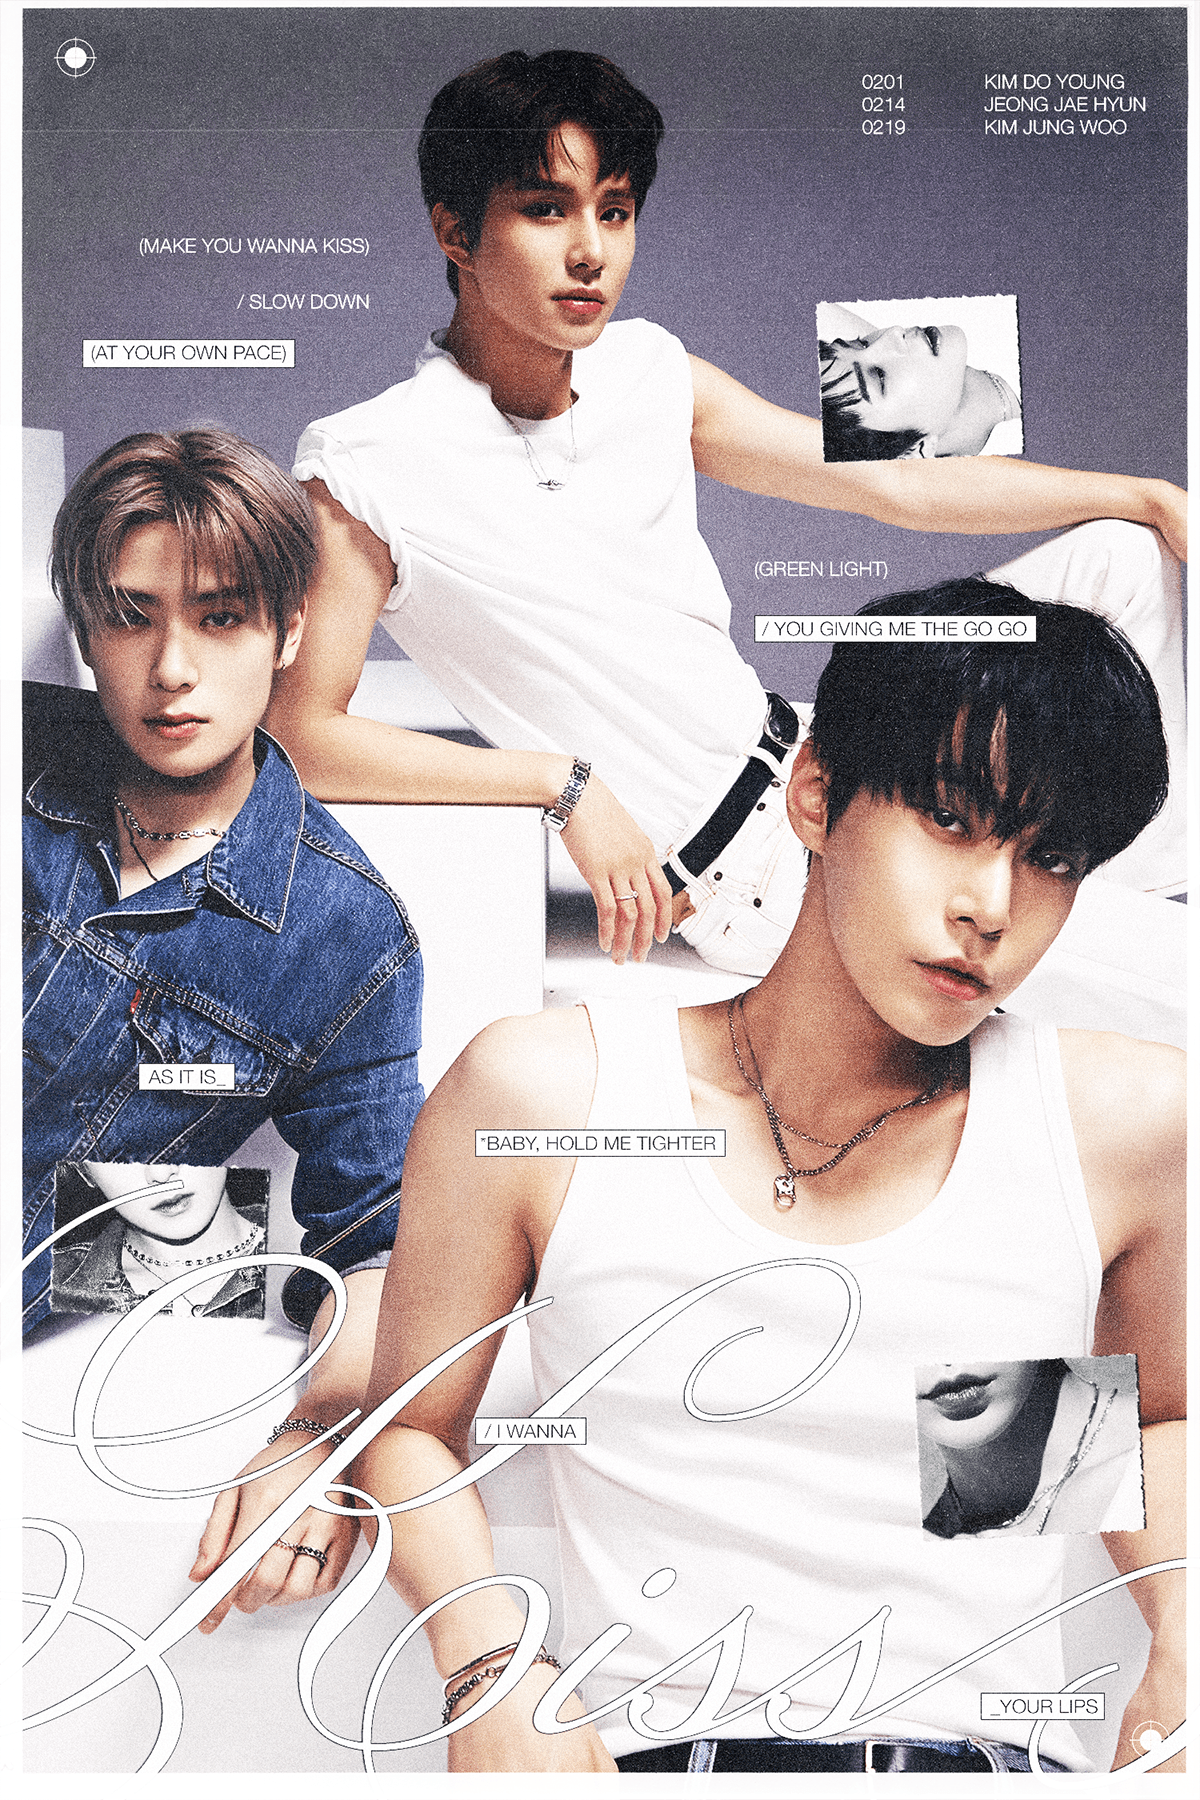 NCT nct 127 kpop music poster Poster Design dojaejung